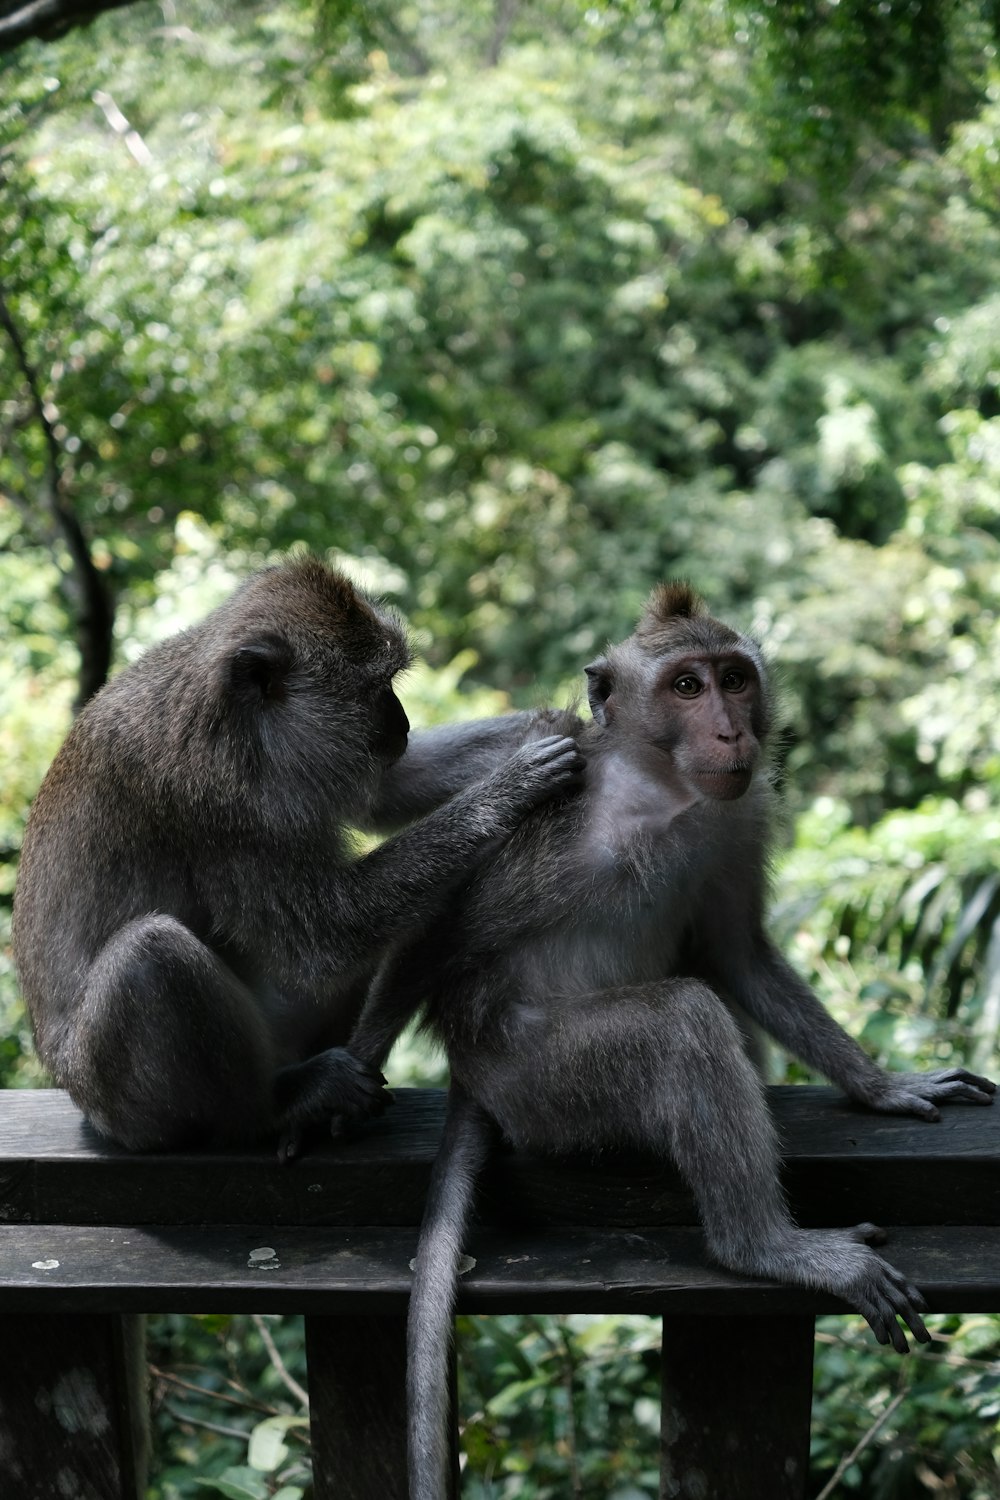 a couple of monkeys sitting on top of a wooden bench